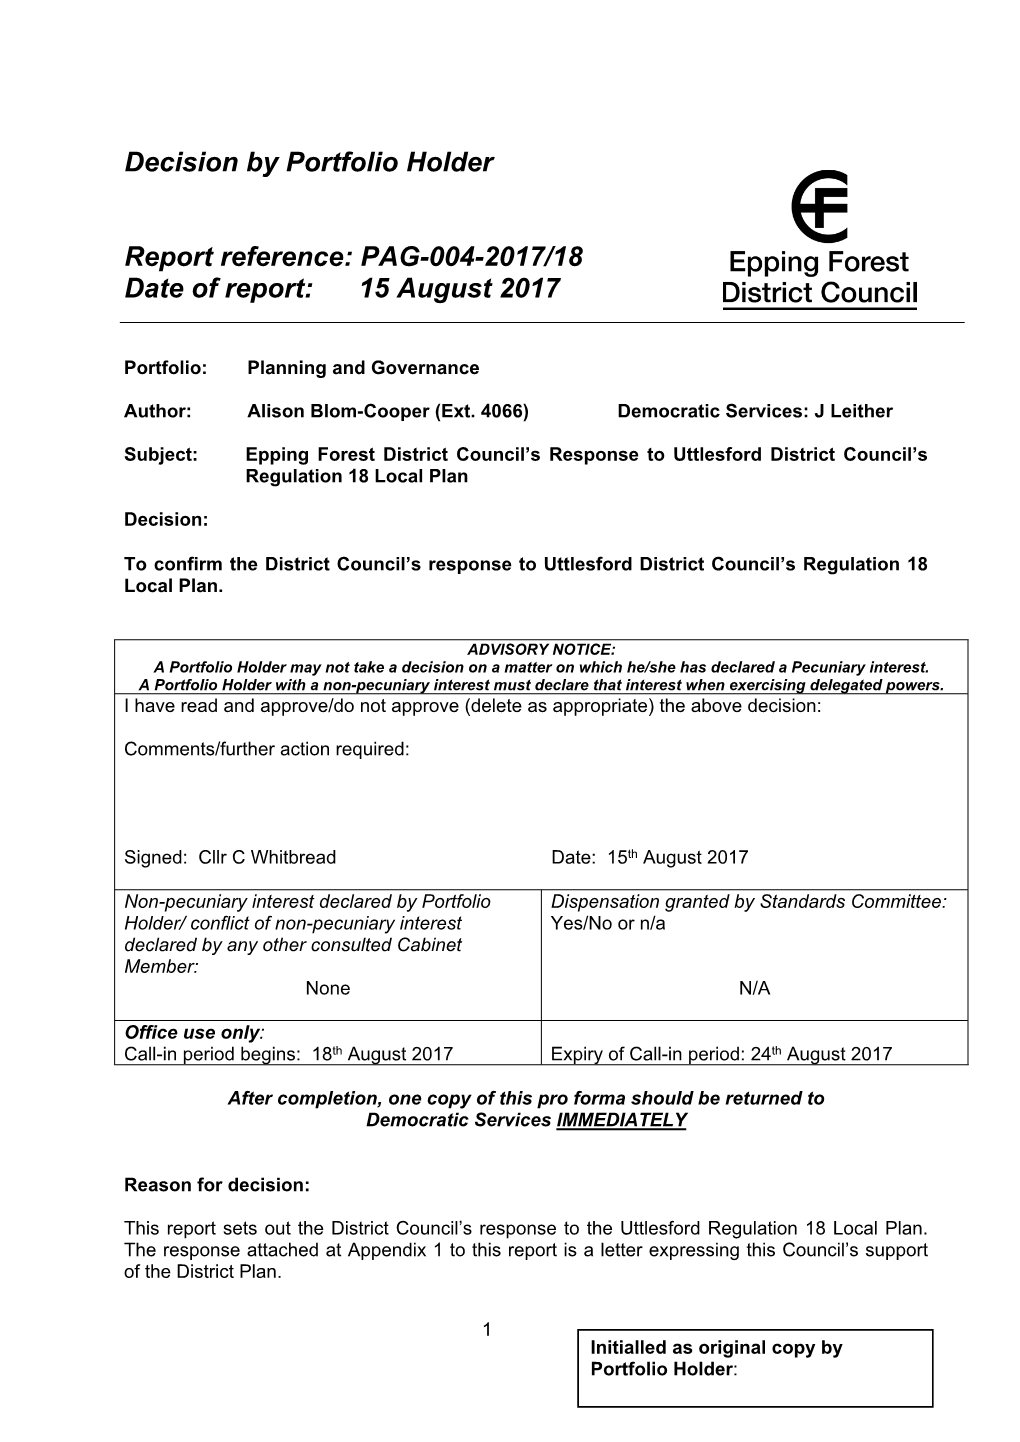 PAG-004-2017/18 Date of Report: 15 August 2017